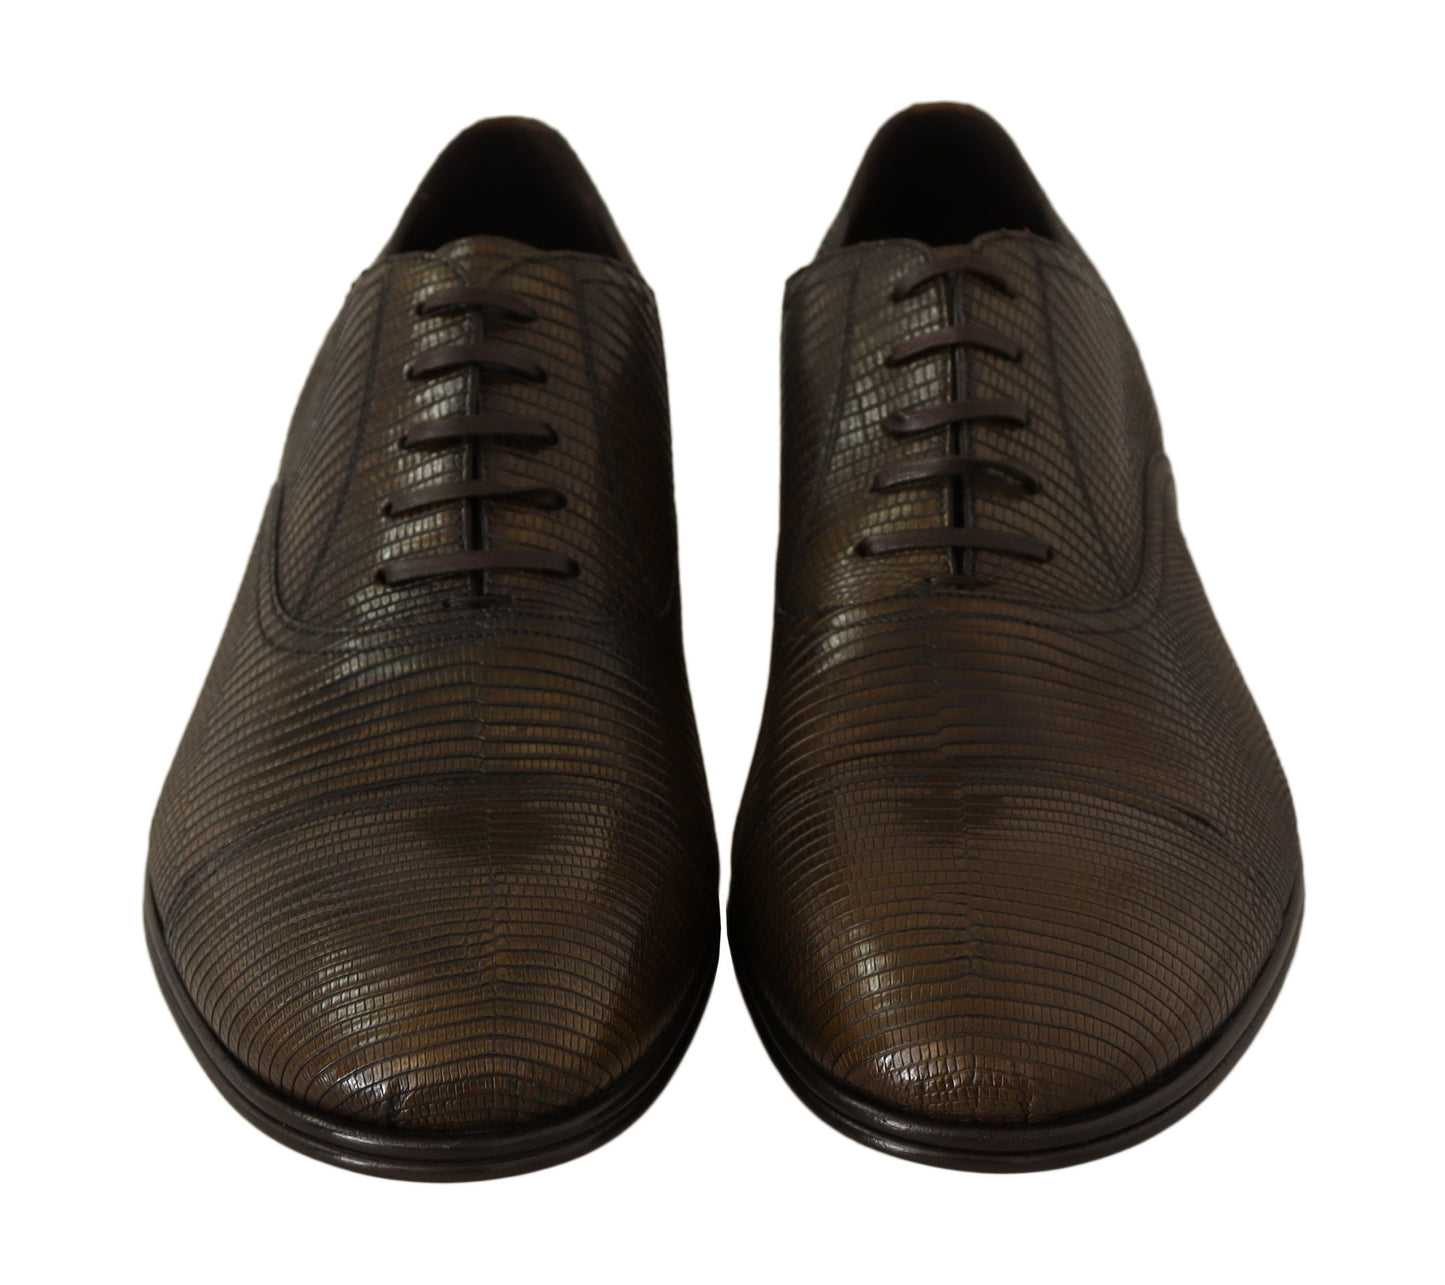 Brown Lizard Leather Dress Oxford Shoes - Designed by Dolce & Gabbana Available to Buy at a Discounted Price on Moon Behind The Hill Online Designer Discount Store